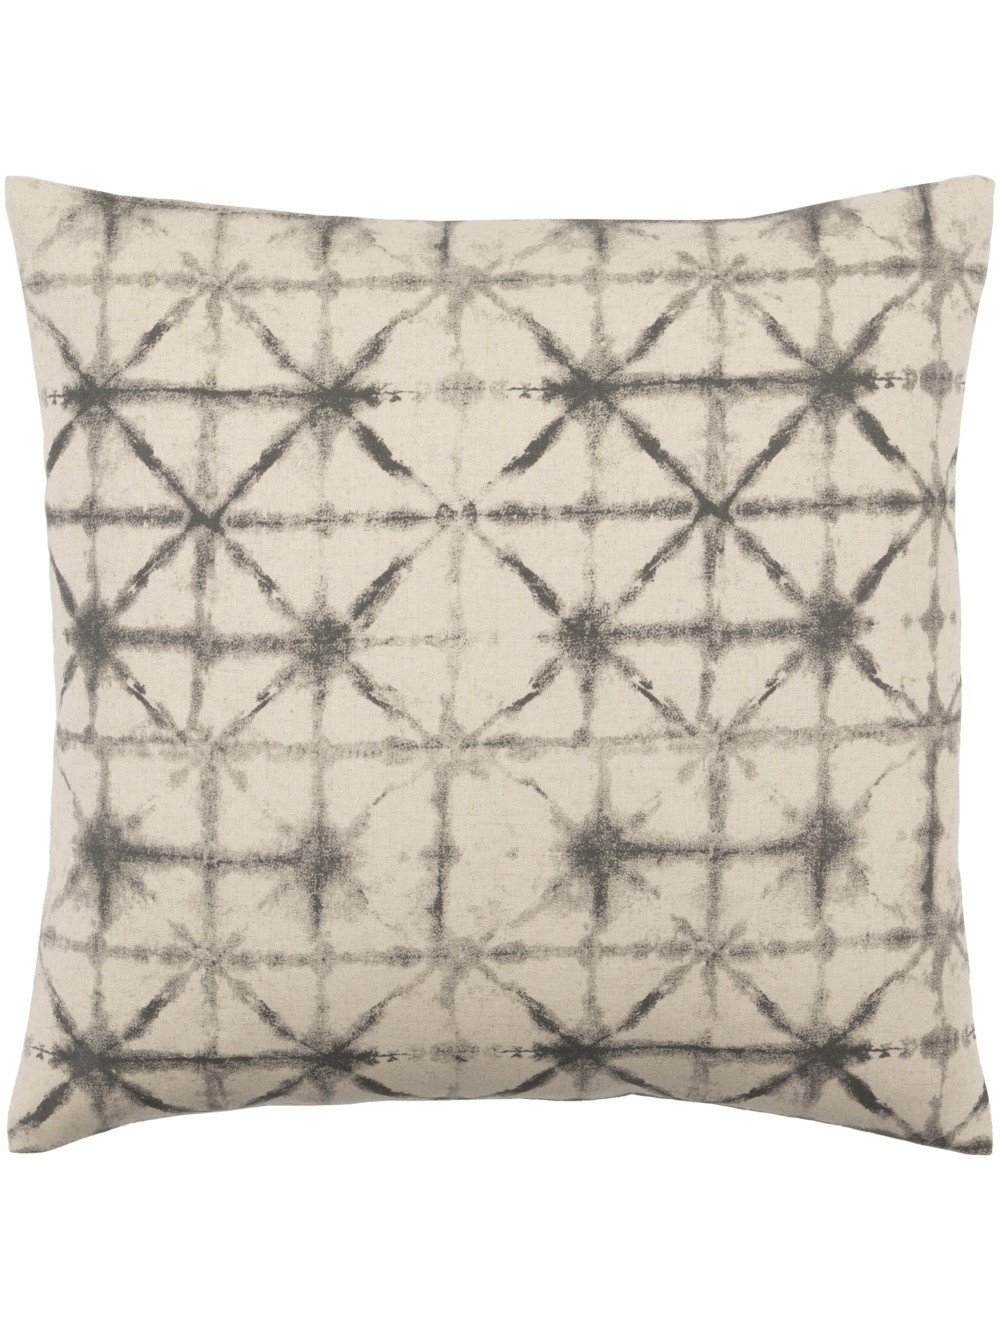 Luane Pillow, Slate- 18" x 18" - Polyester Filled - Image 0